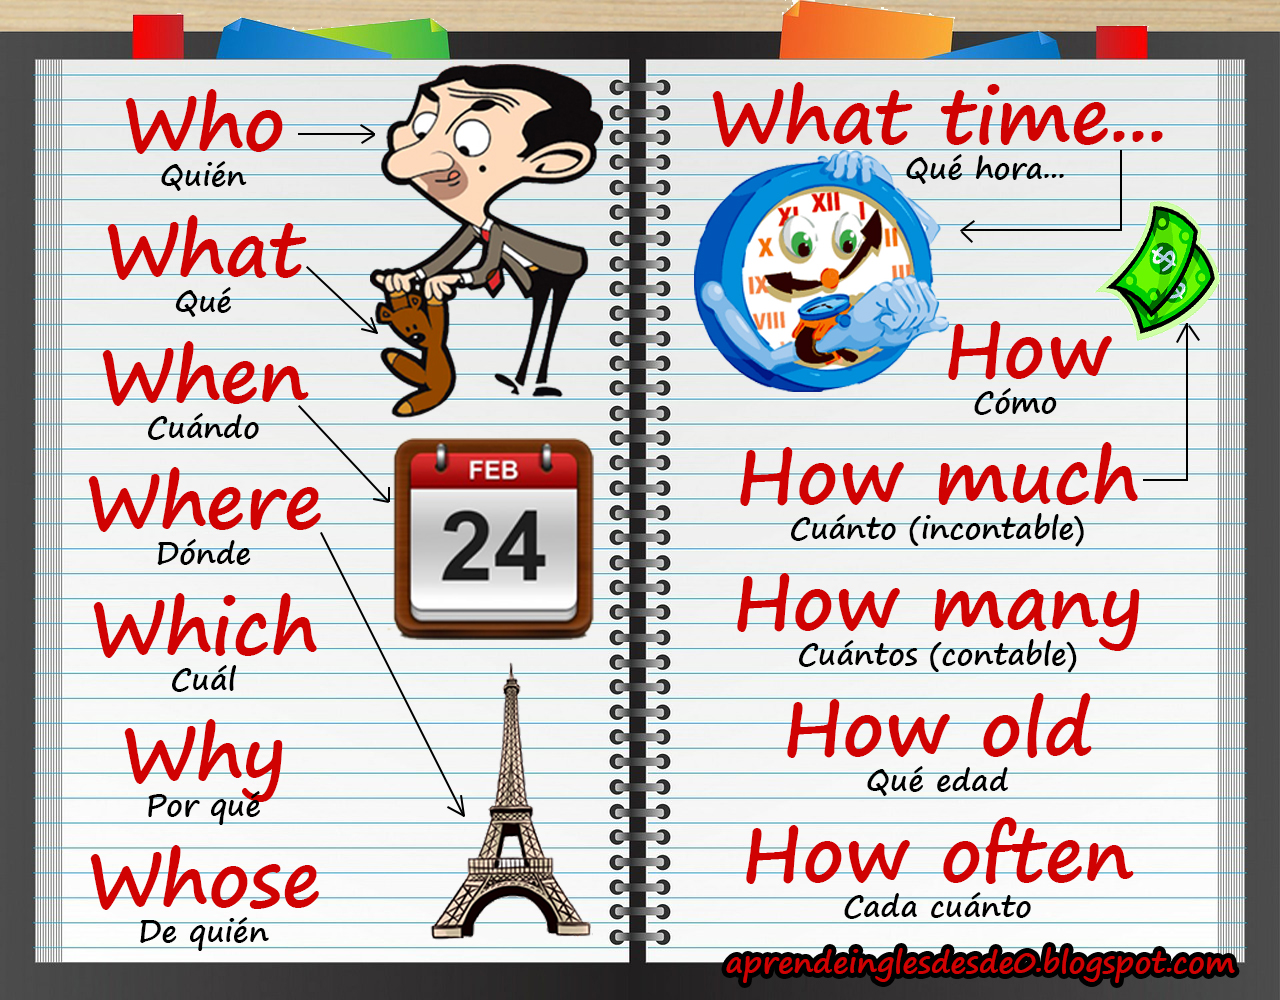 Wh question words. Вопросы where when what. WH questions для детей. What where when who why английский. Задания на WH questions.